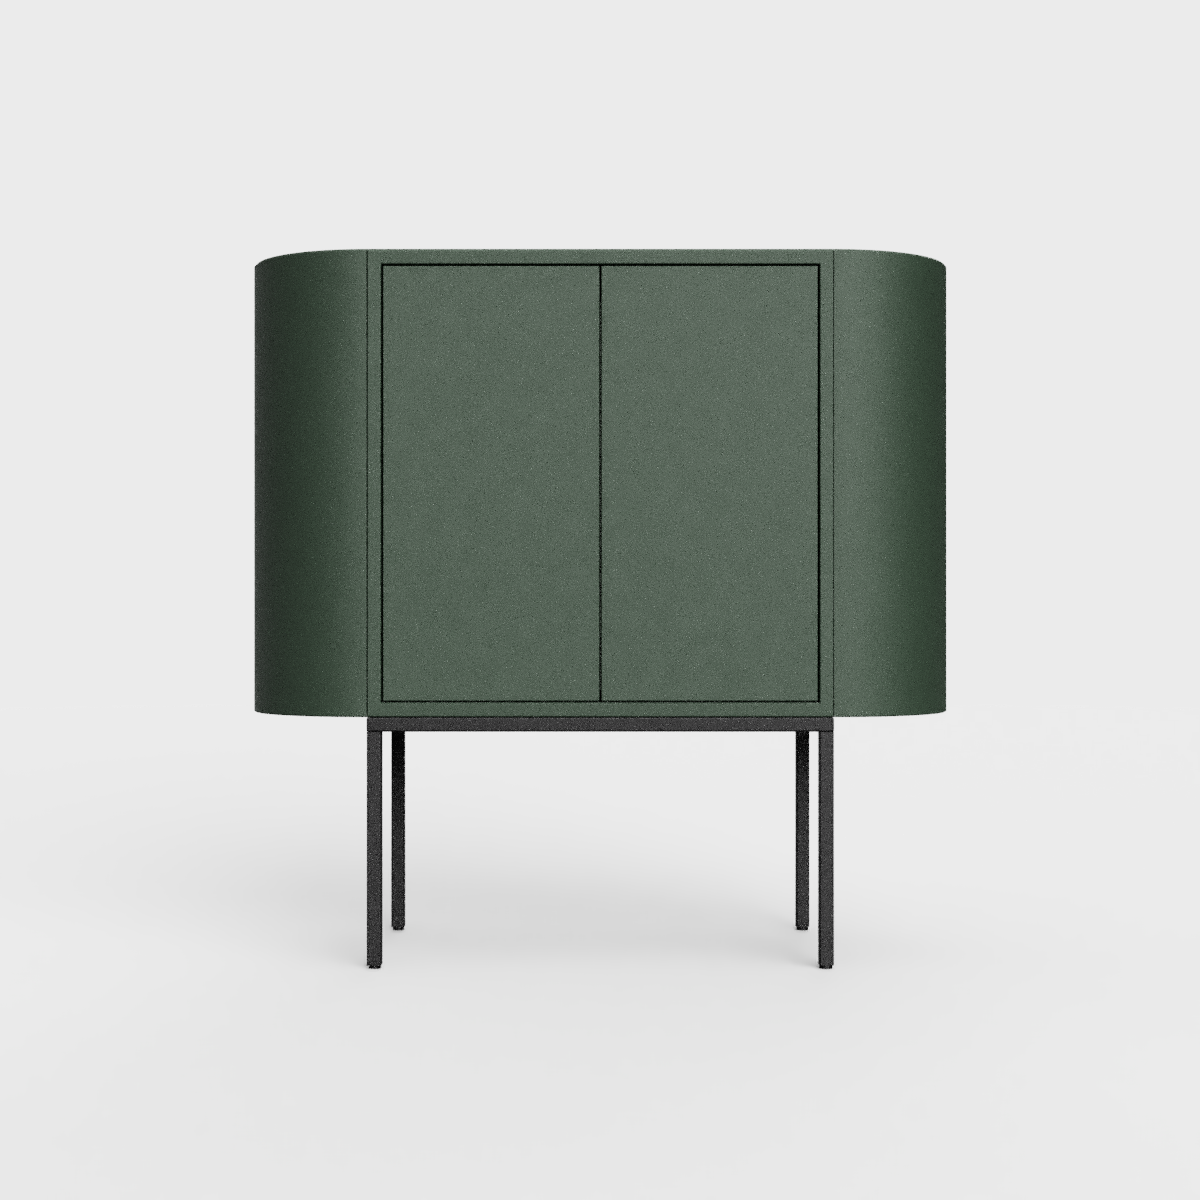 Siena 01 Sideboard in bottle green color, powder-coated steel, elegant and modern piece of furniture for your living room